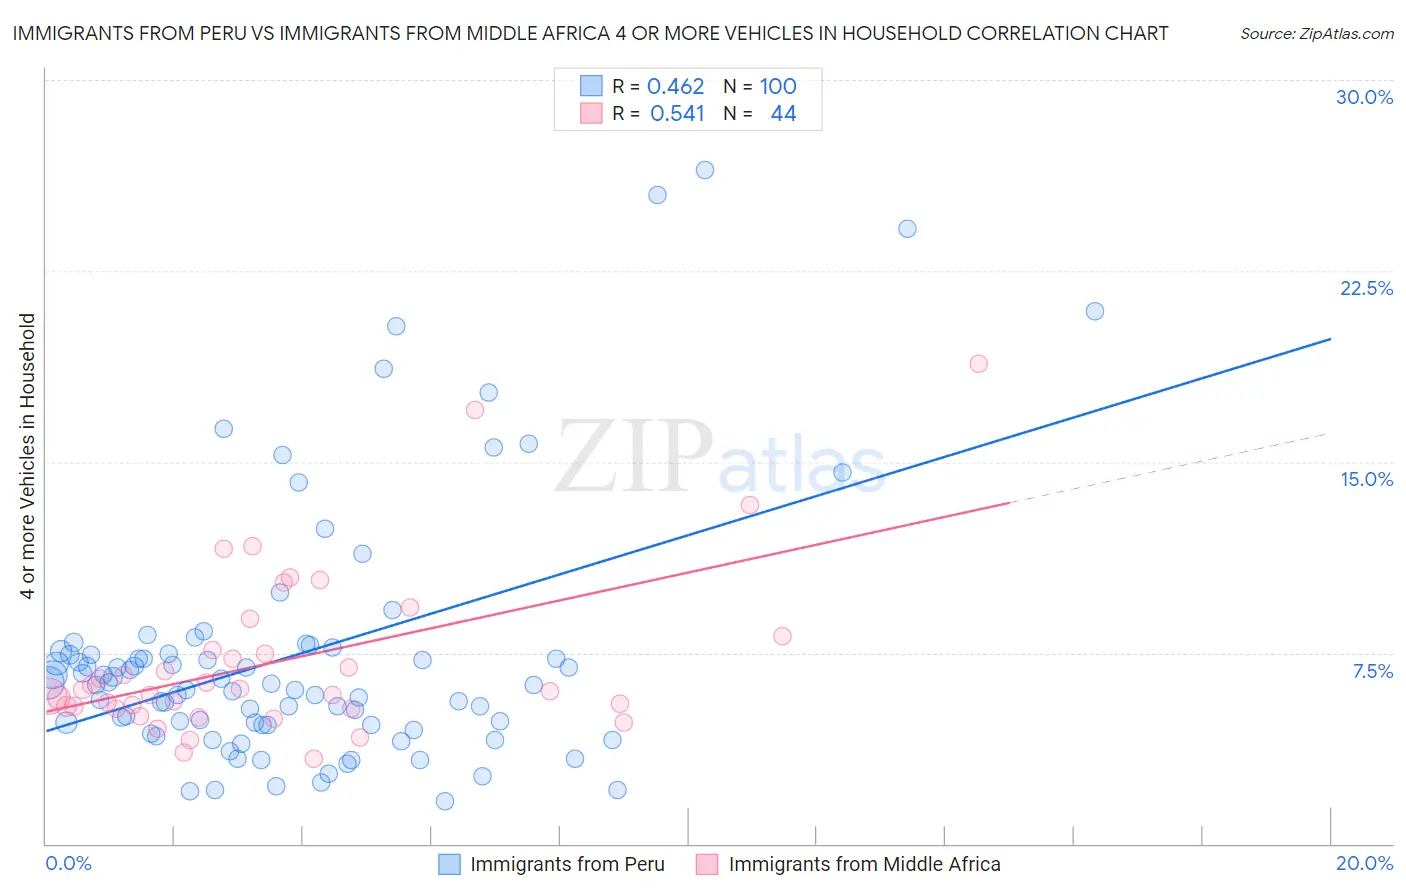 Immigrants from Peru vs Immigrants from Middle Africa 4 or more Vehicles in Household